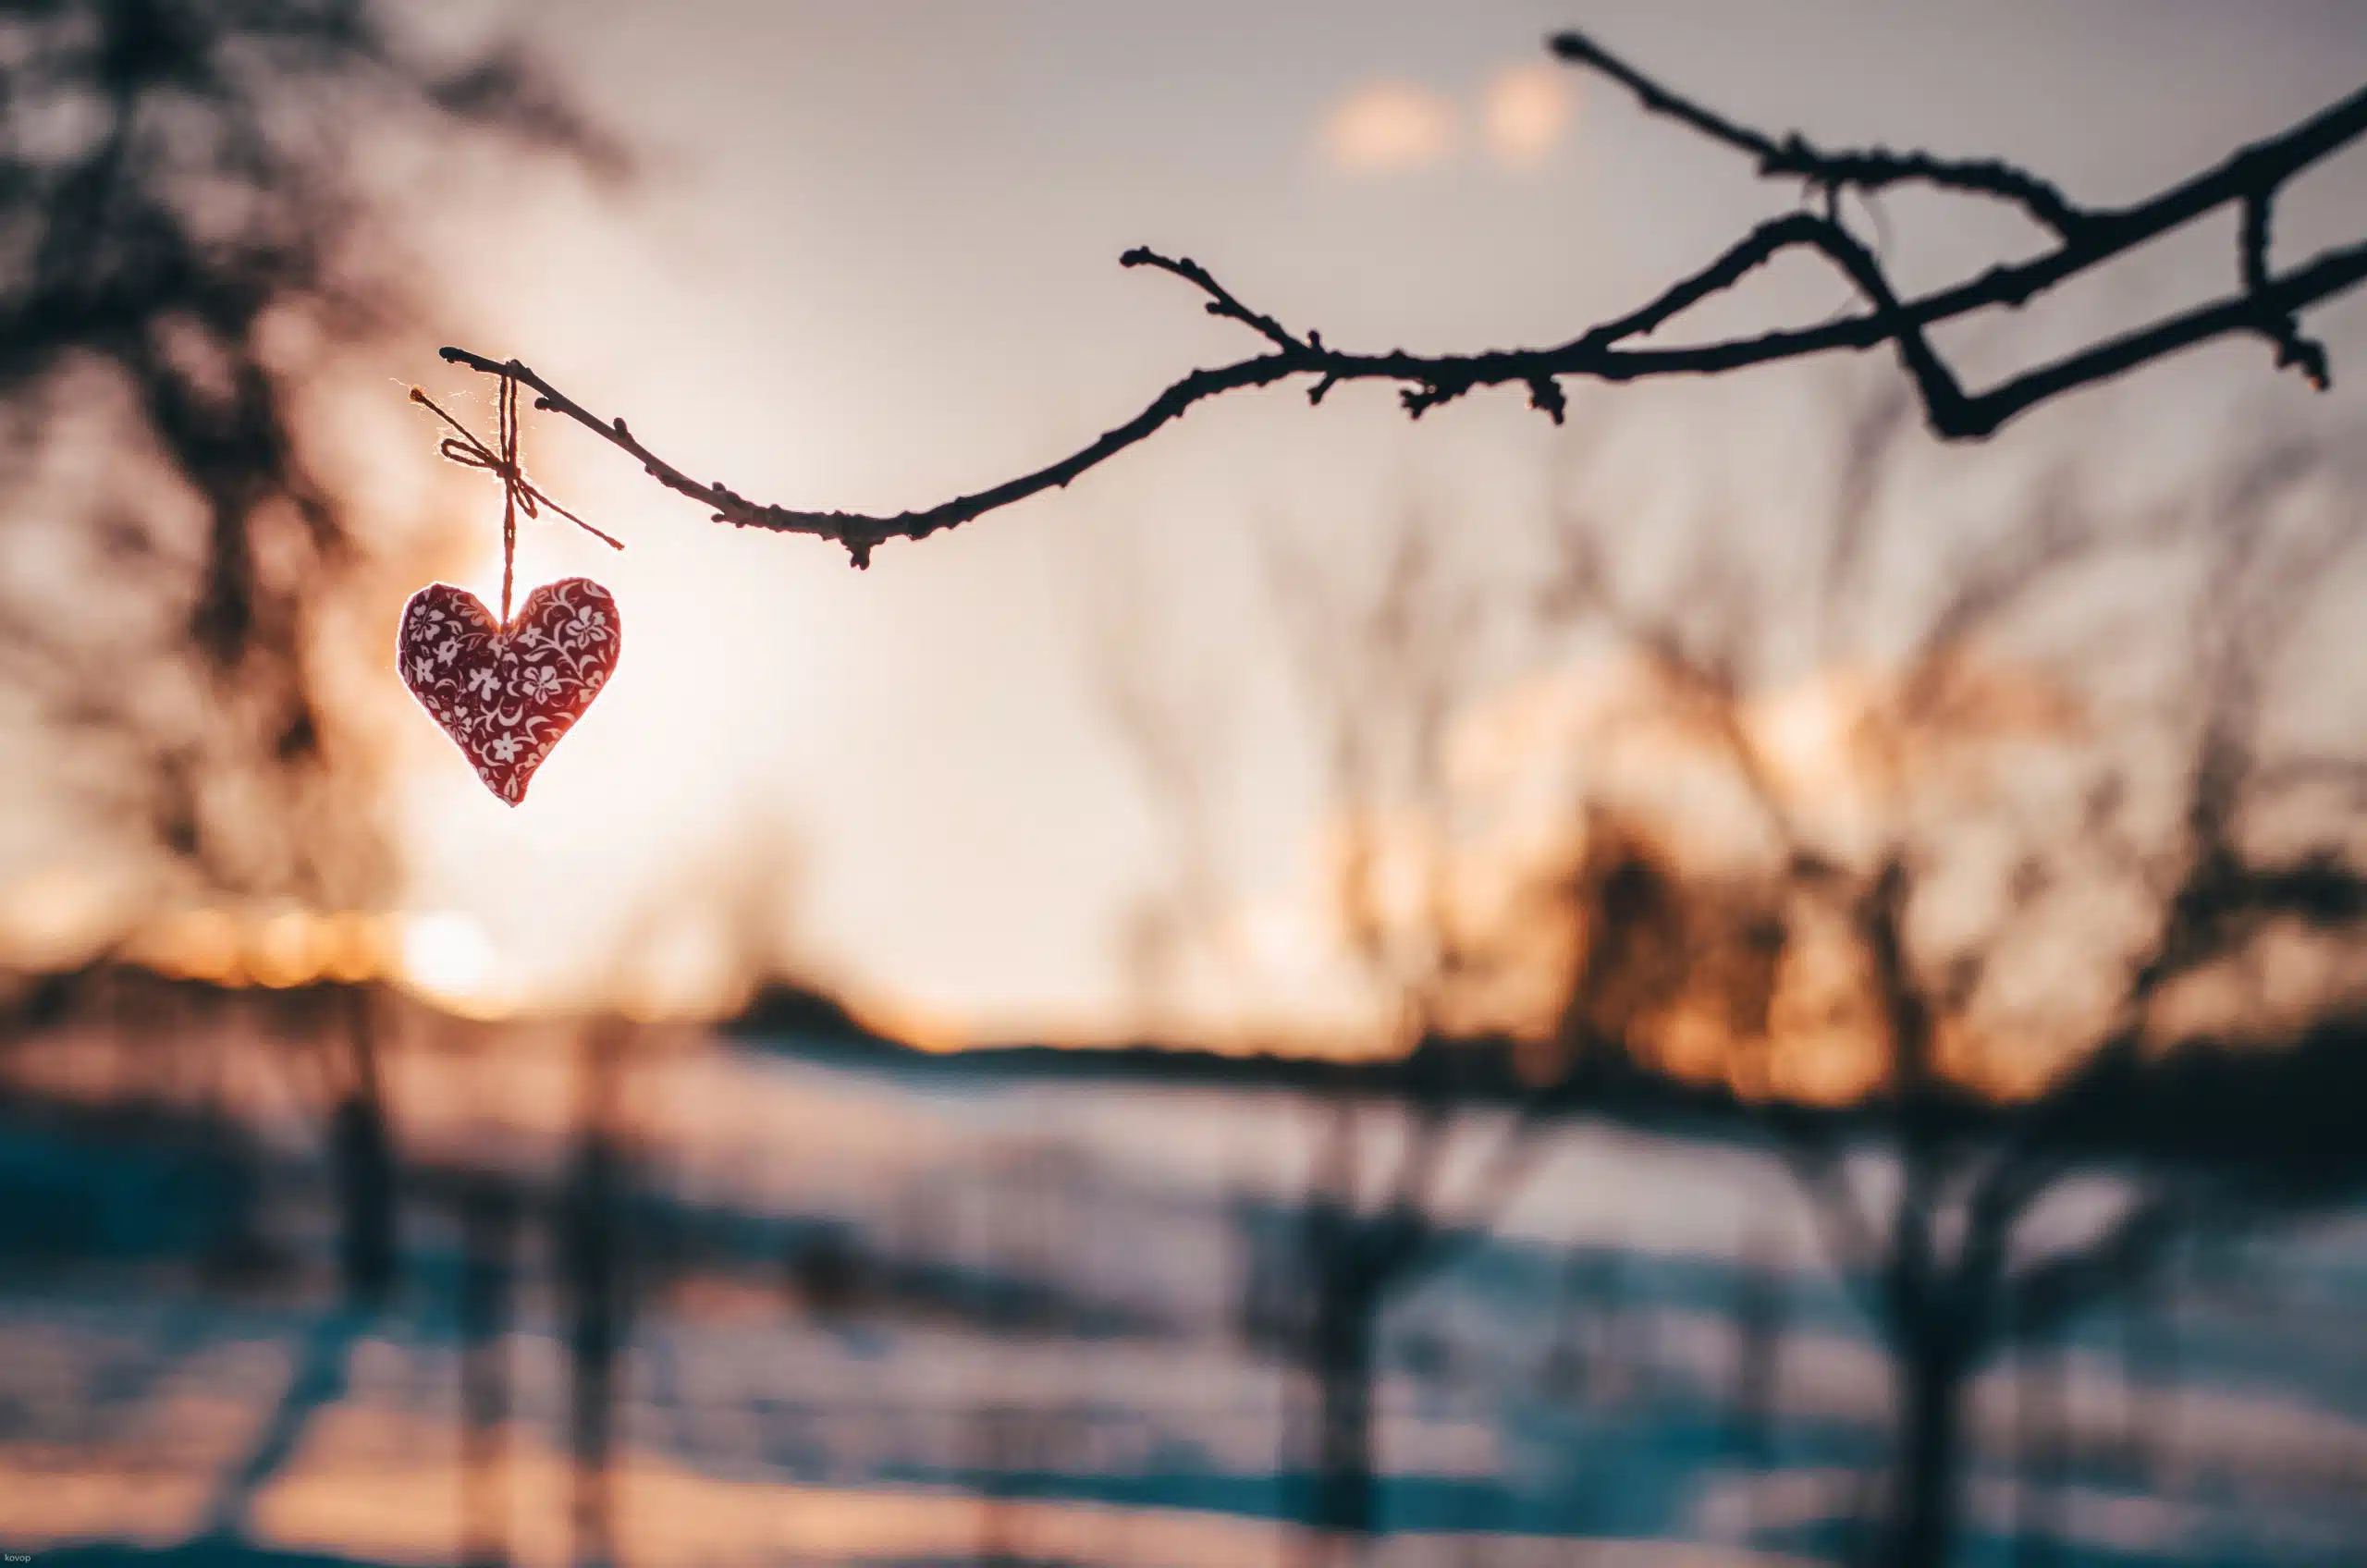 Wooden handmade heart hanging on a tree branch without leaves, in beautiful winter landscape